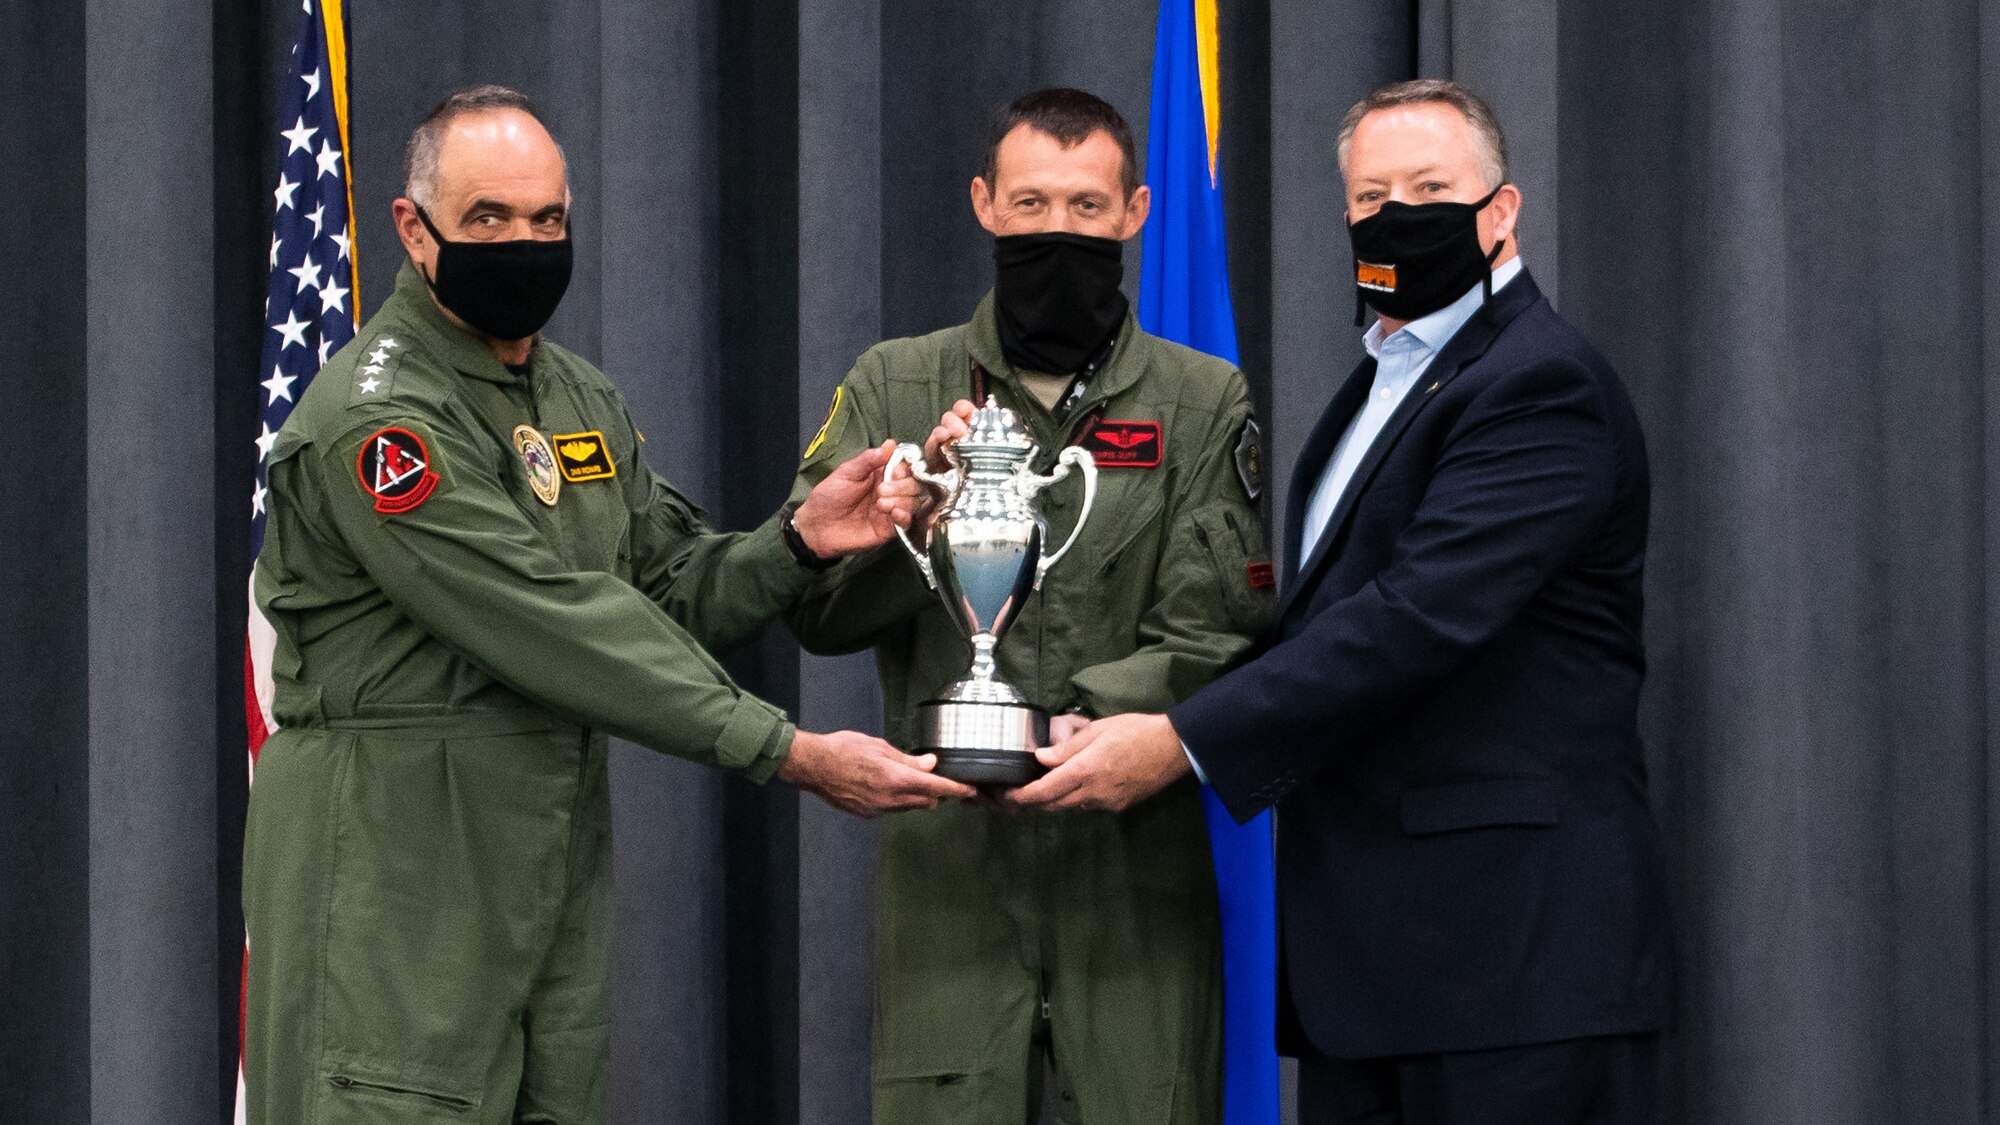 (Left to right) Adm. Charles Richard, U.S. Strategic Command commander, Lt. Col. Christopher Duff, 96th Bomb Squadron commander, and Mr. Tim Burke, Strategic Command Consultation Committee chairman, hold the Omaha Trophy during the presentation of the Omaha Trophy to the 96th BS at Barksdale Air Force Base, Louisiana, March 30, 2021. The 96th BS is the first bomb squadron to be presented the prestigious award. (U.S. Air Force photo by Airman 1st Class Jacob B. Wrightsman)